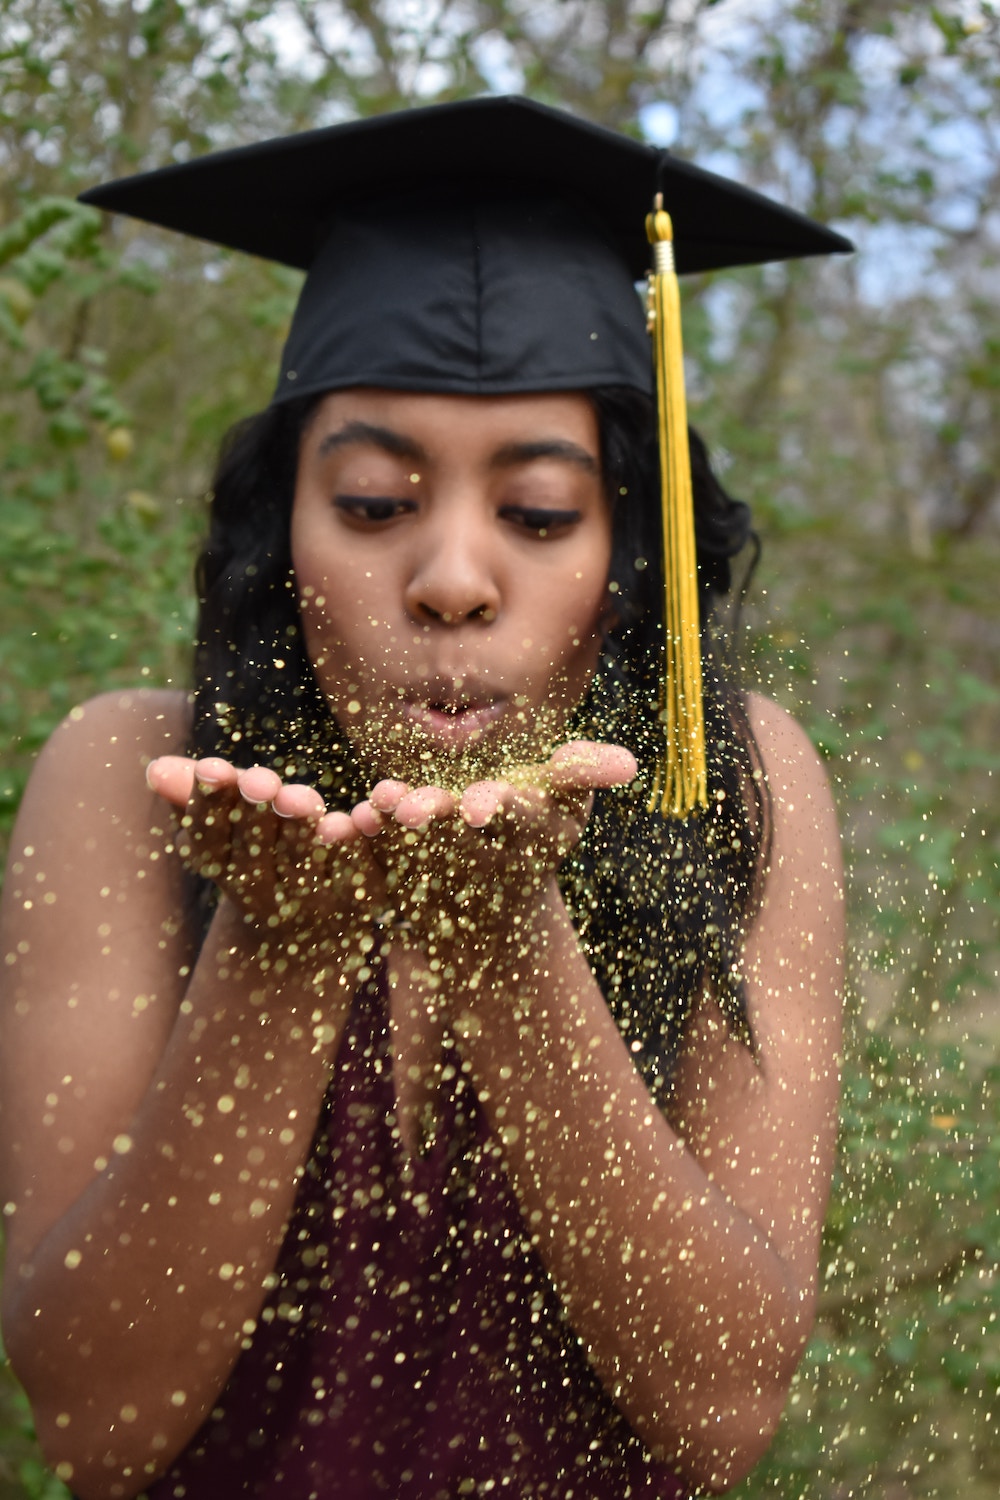 Girl wearing a graduation cap blowing on gold colored confetti.